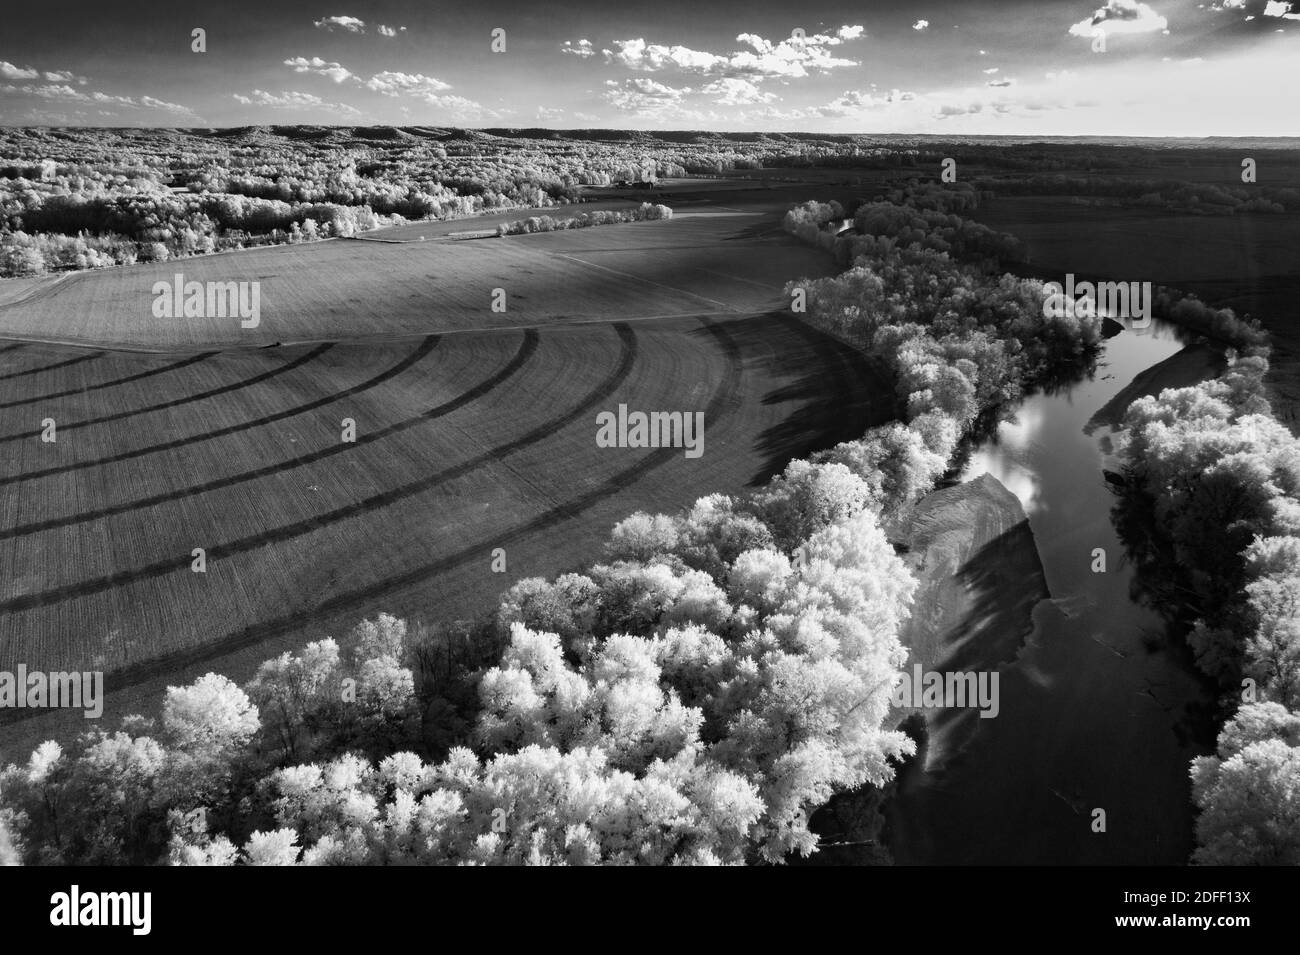 An aerial black and white infrared photo of a field with a river lined by trees.  There are some semi-circles formed by a field irrigator's tires. Stock Photo